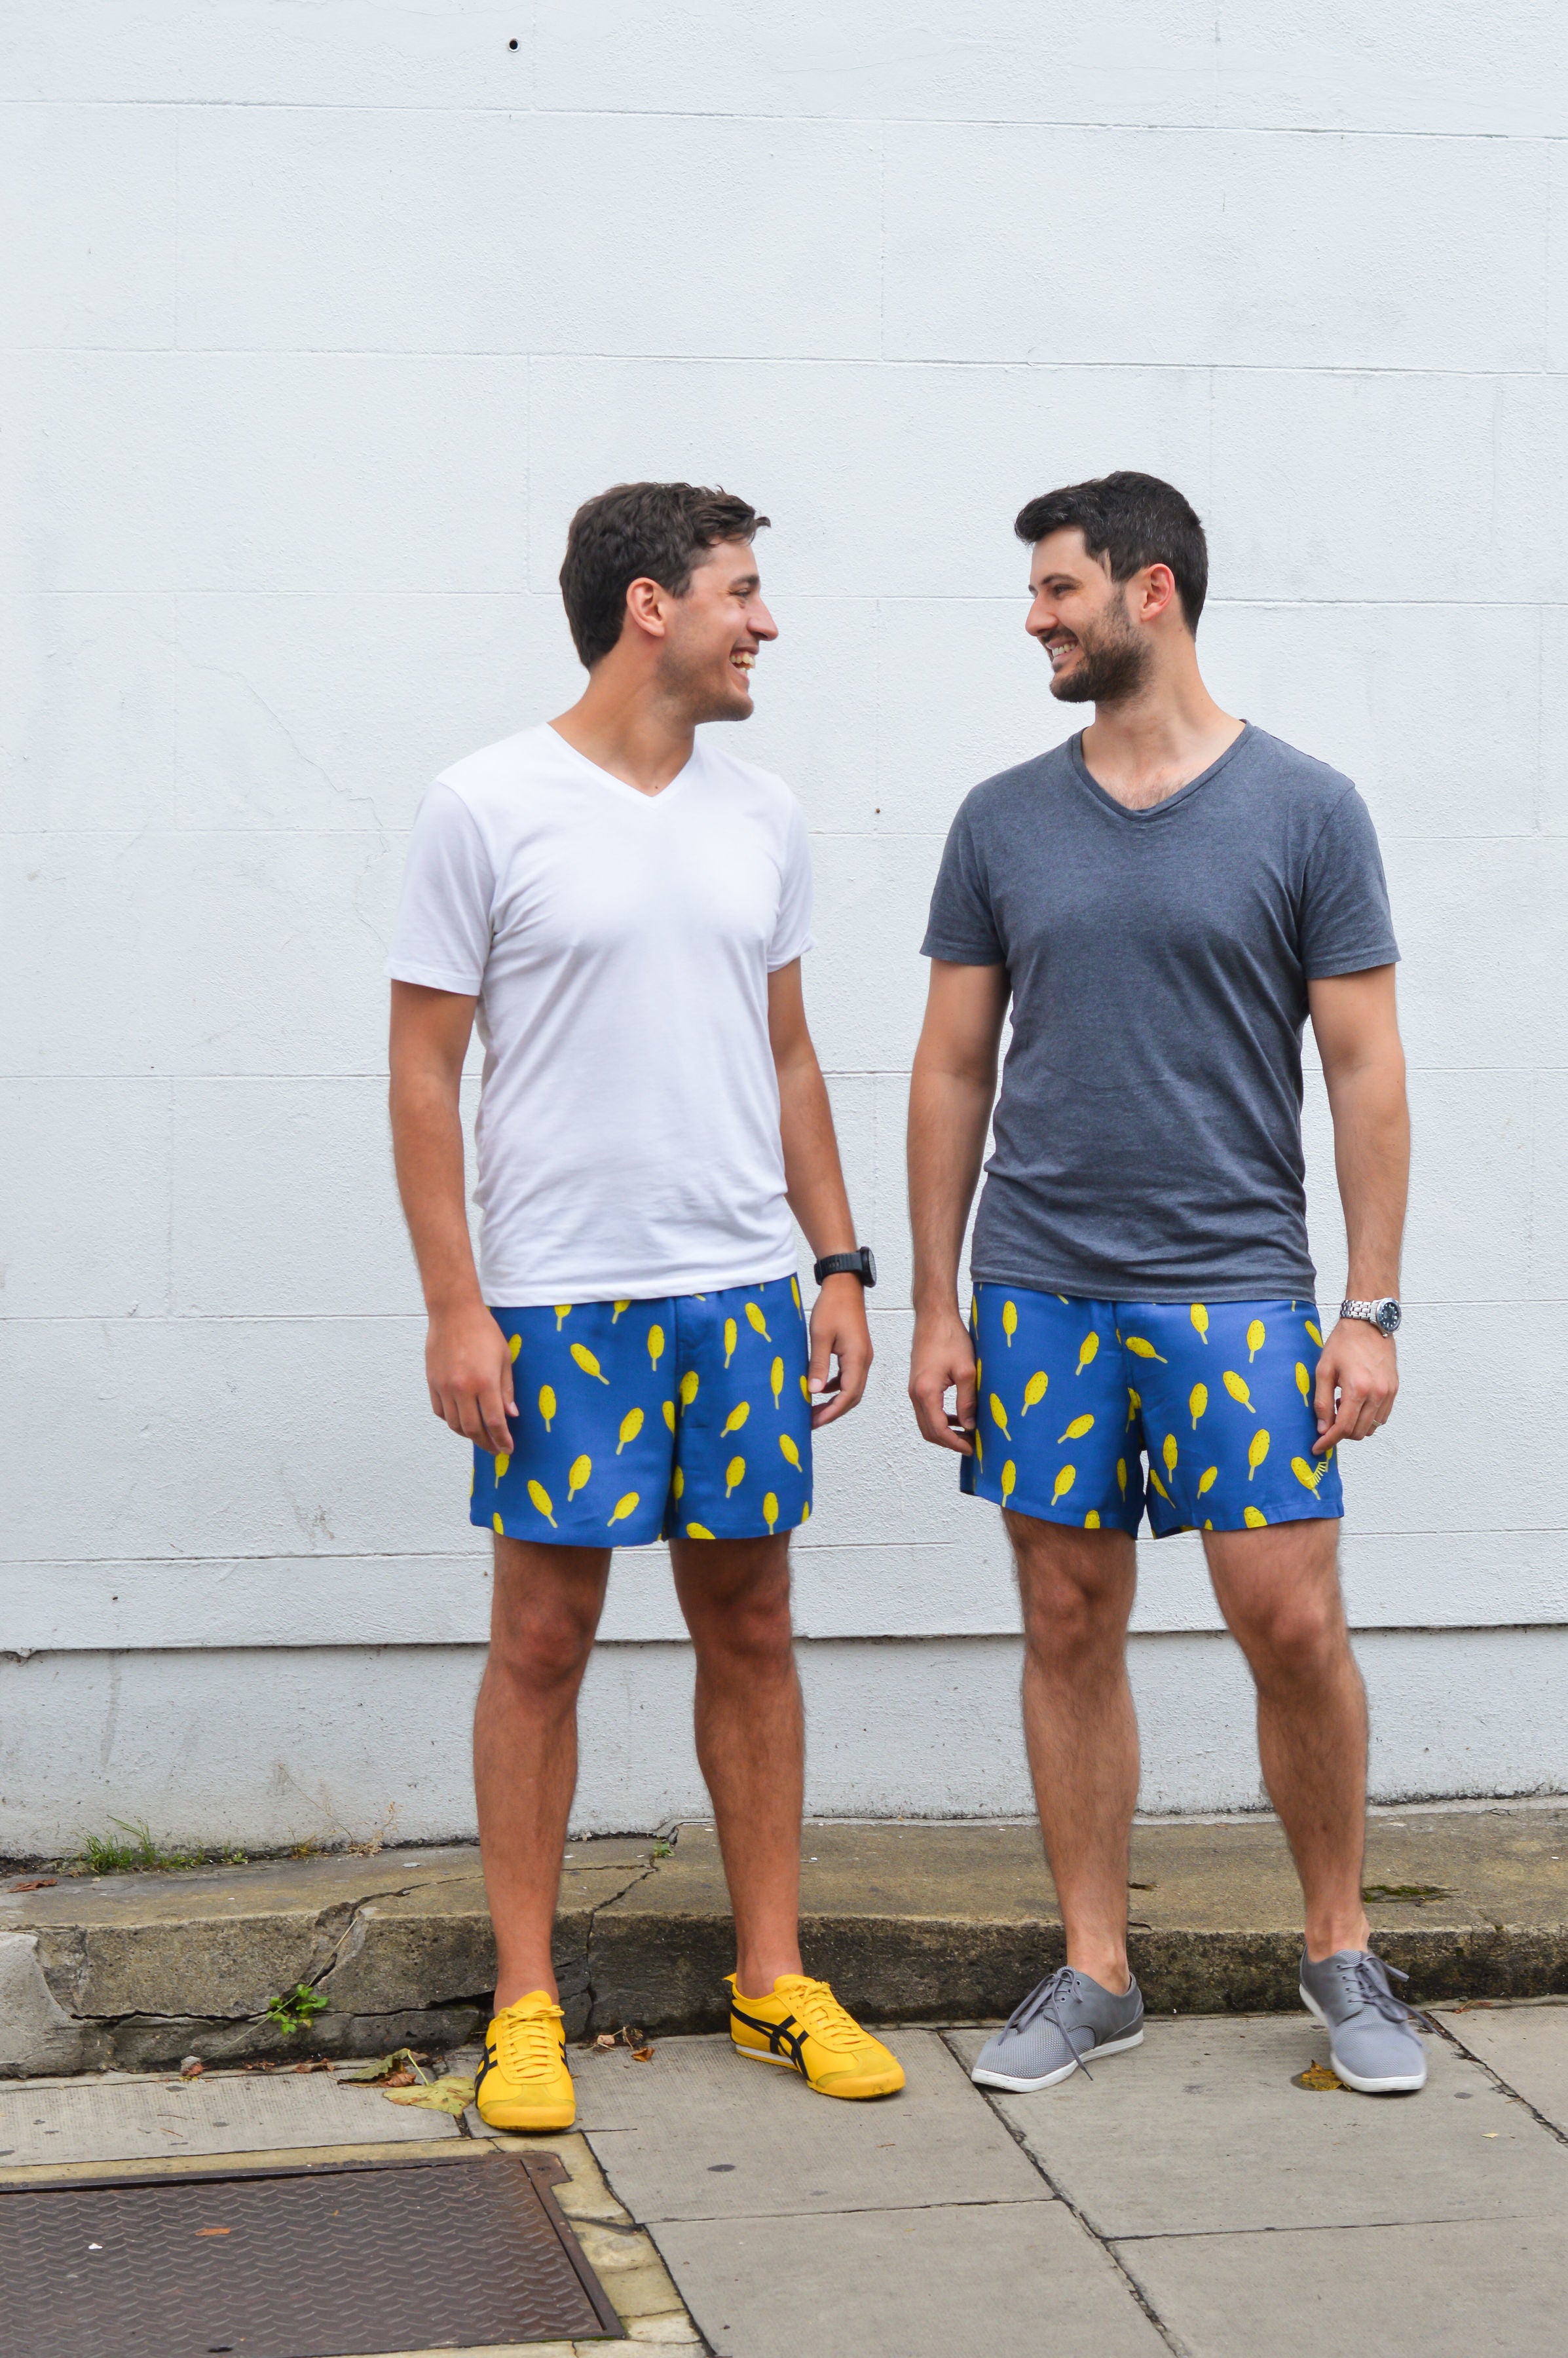 Best Gifts for Men - boxer shorts